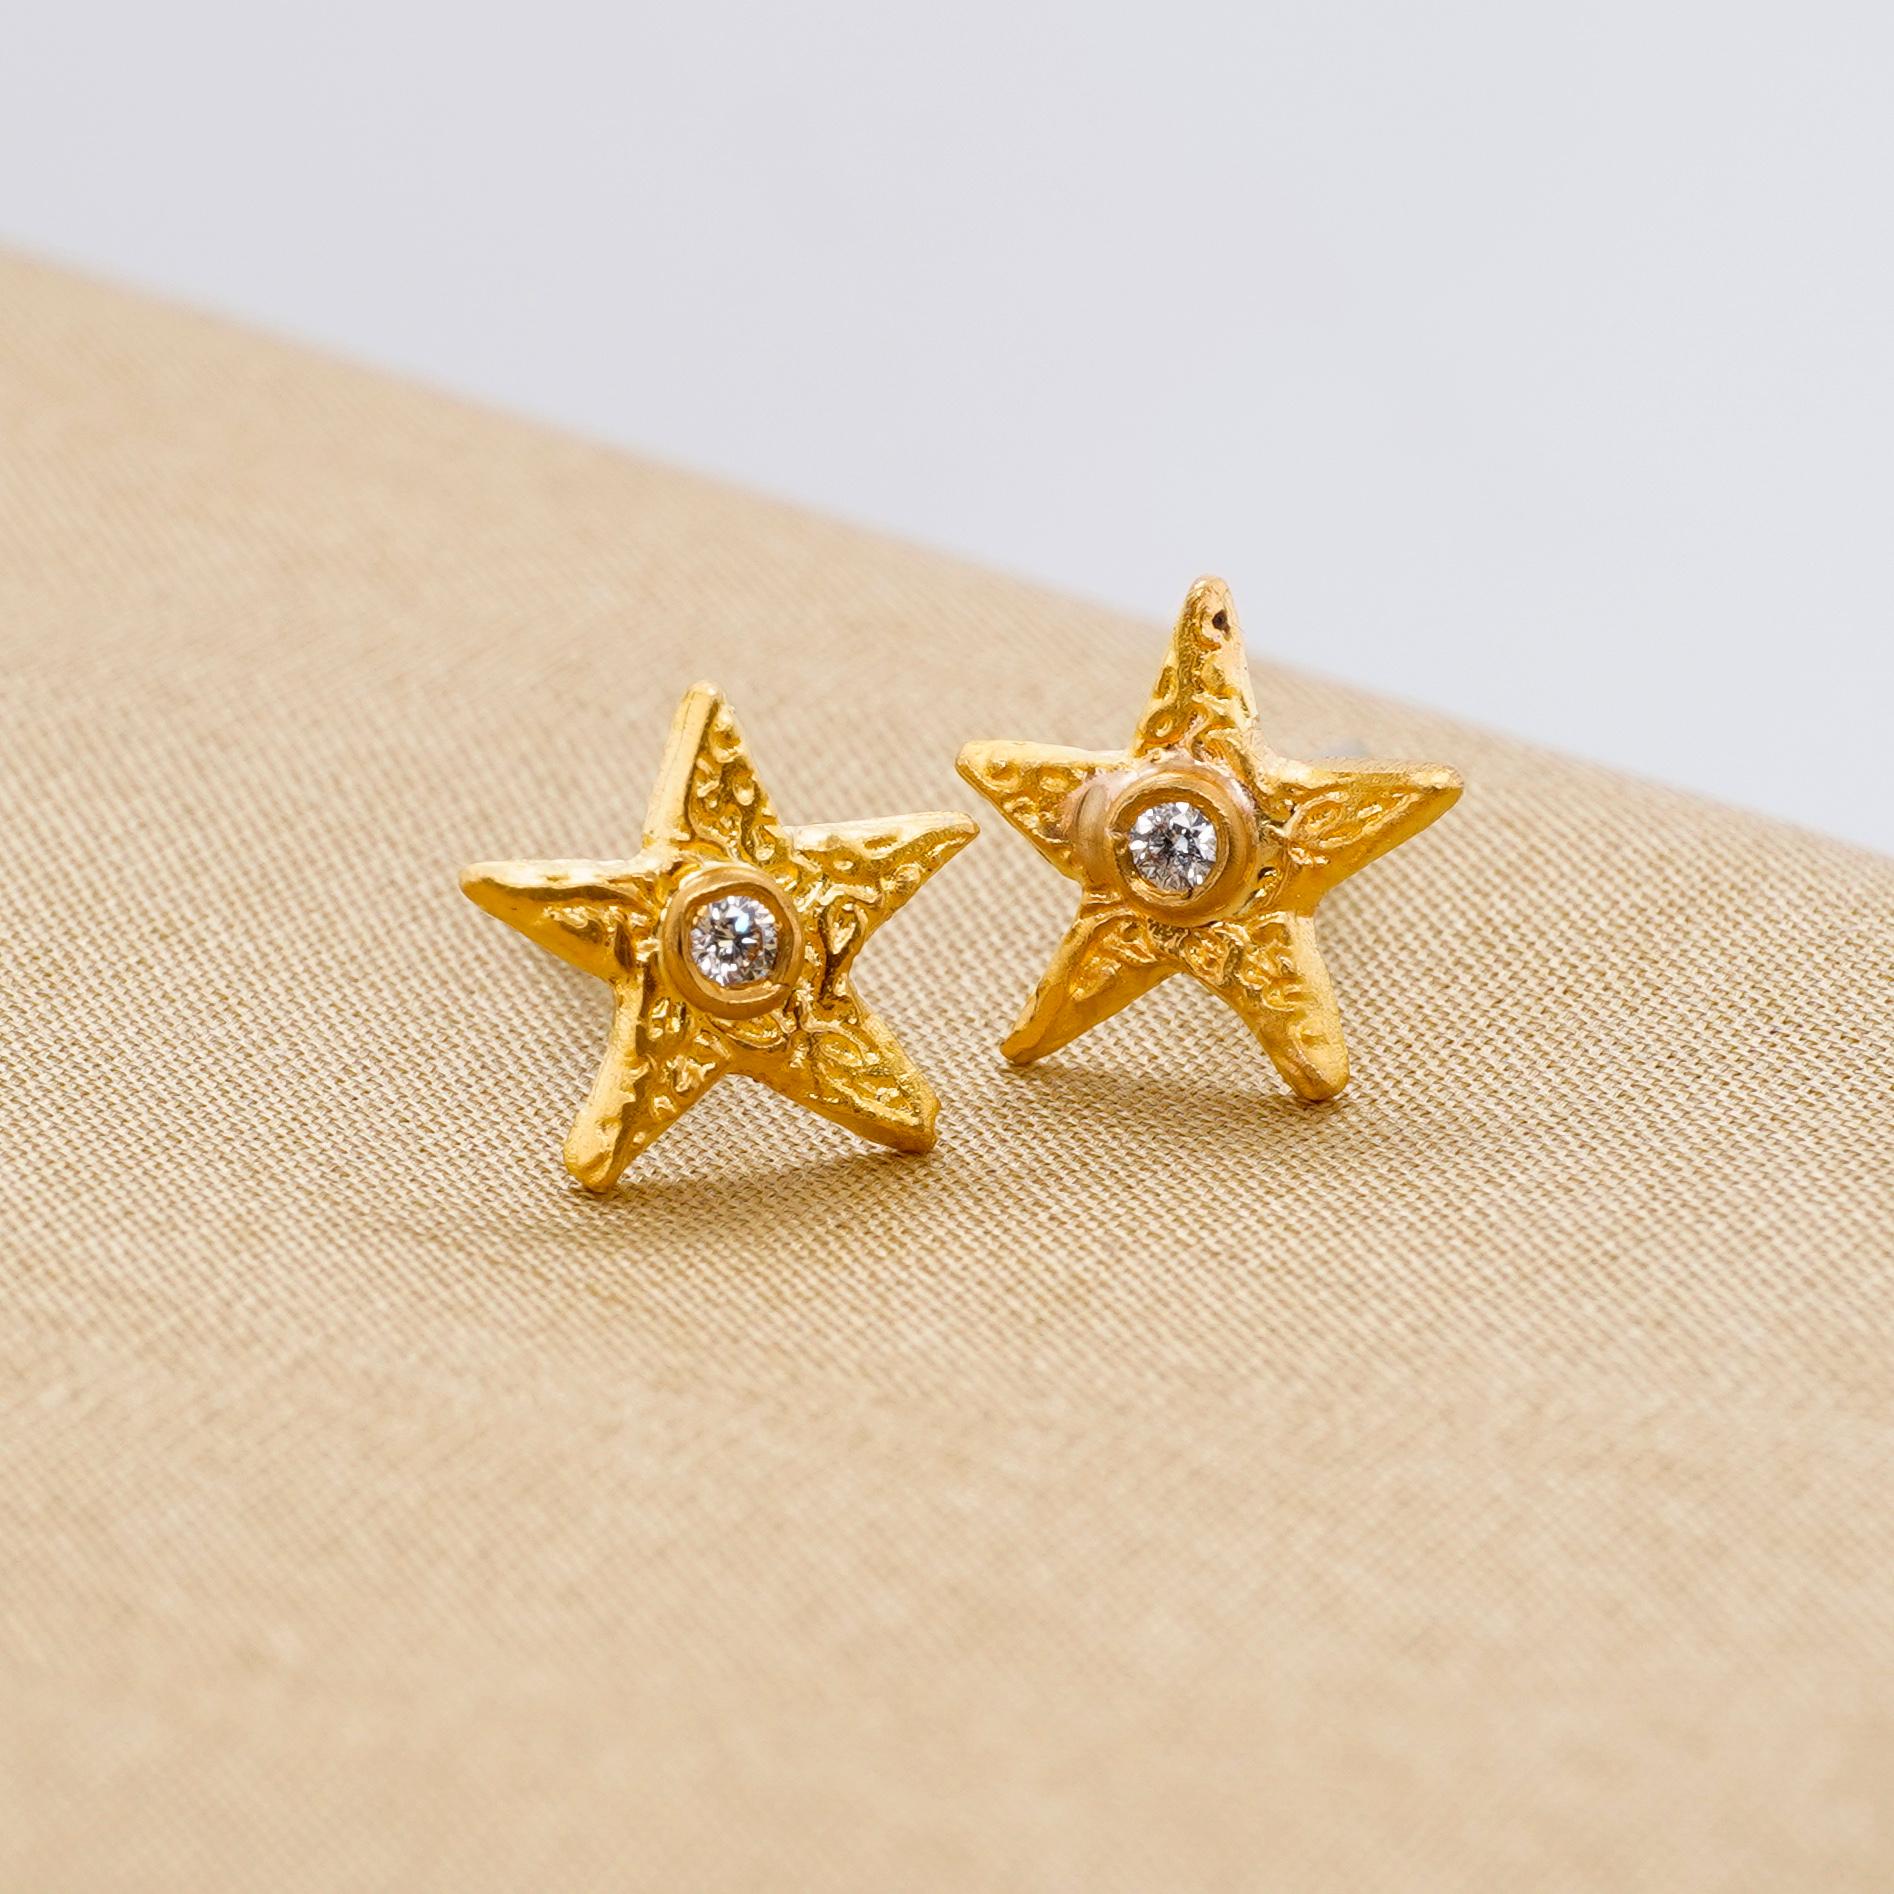 Textured, Star Stud Earrings with Diamonds, in 24kt Gold In New Condition For Sale In Bozeman, MT